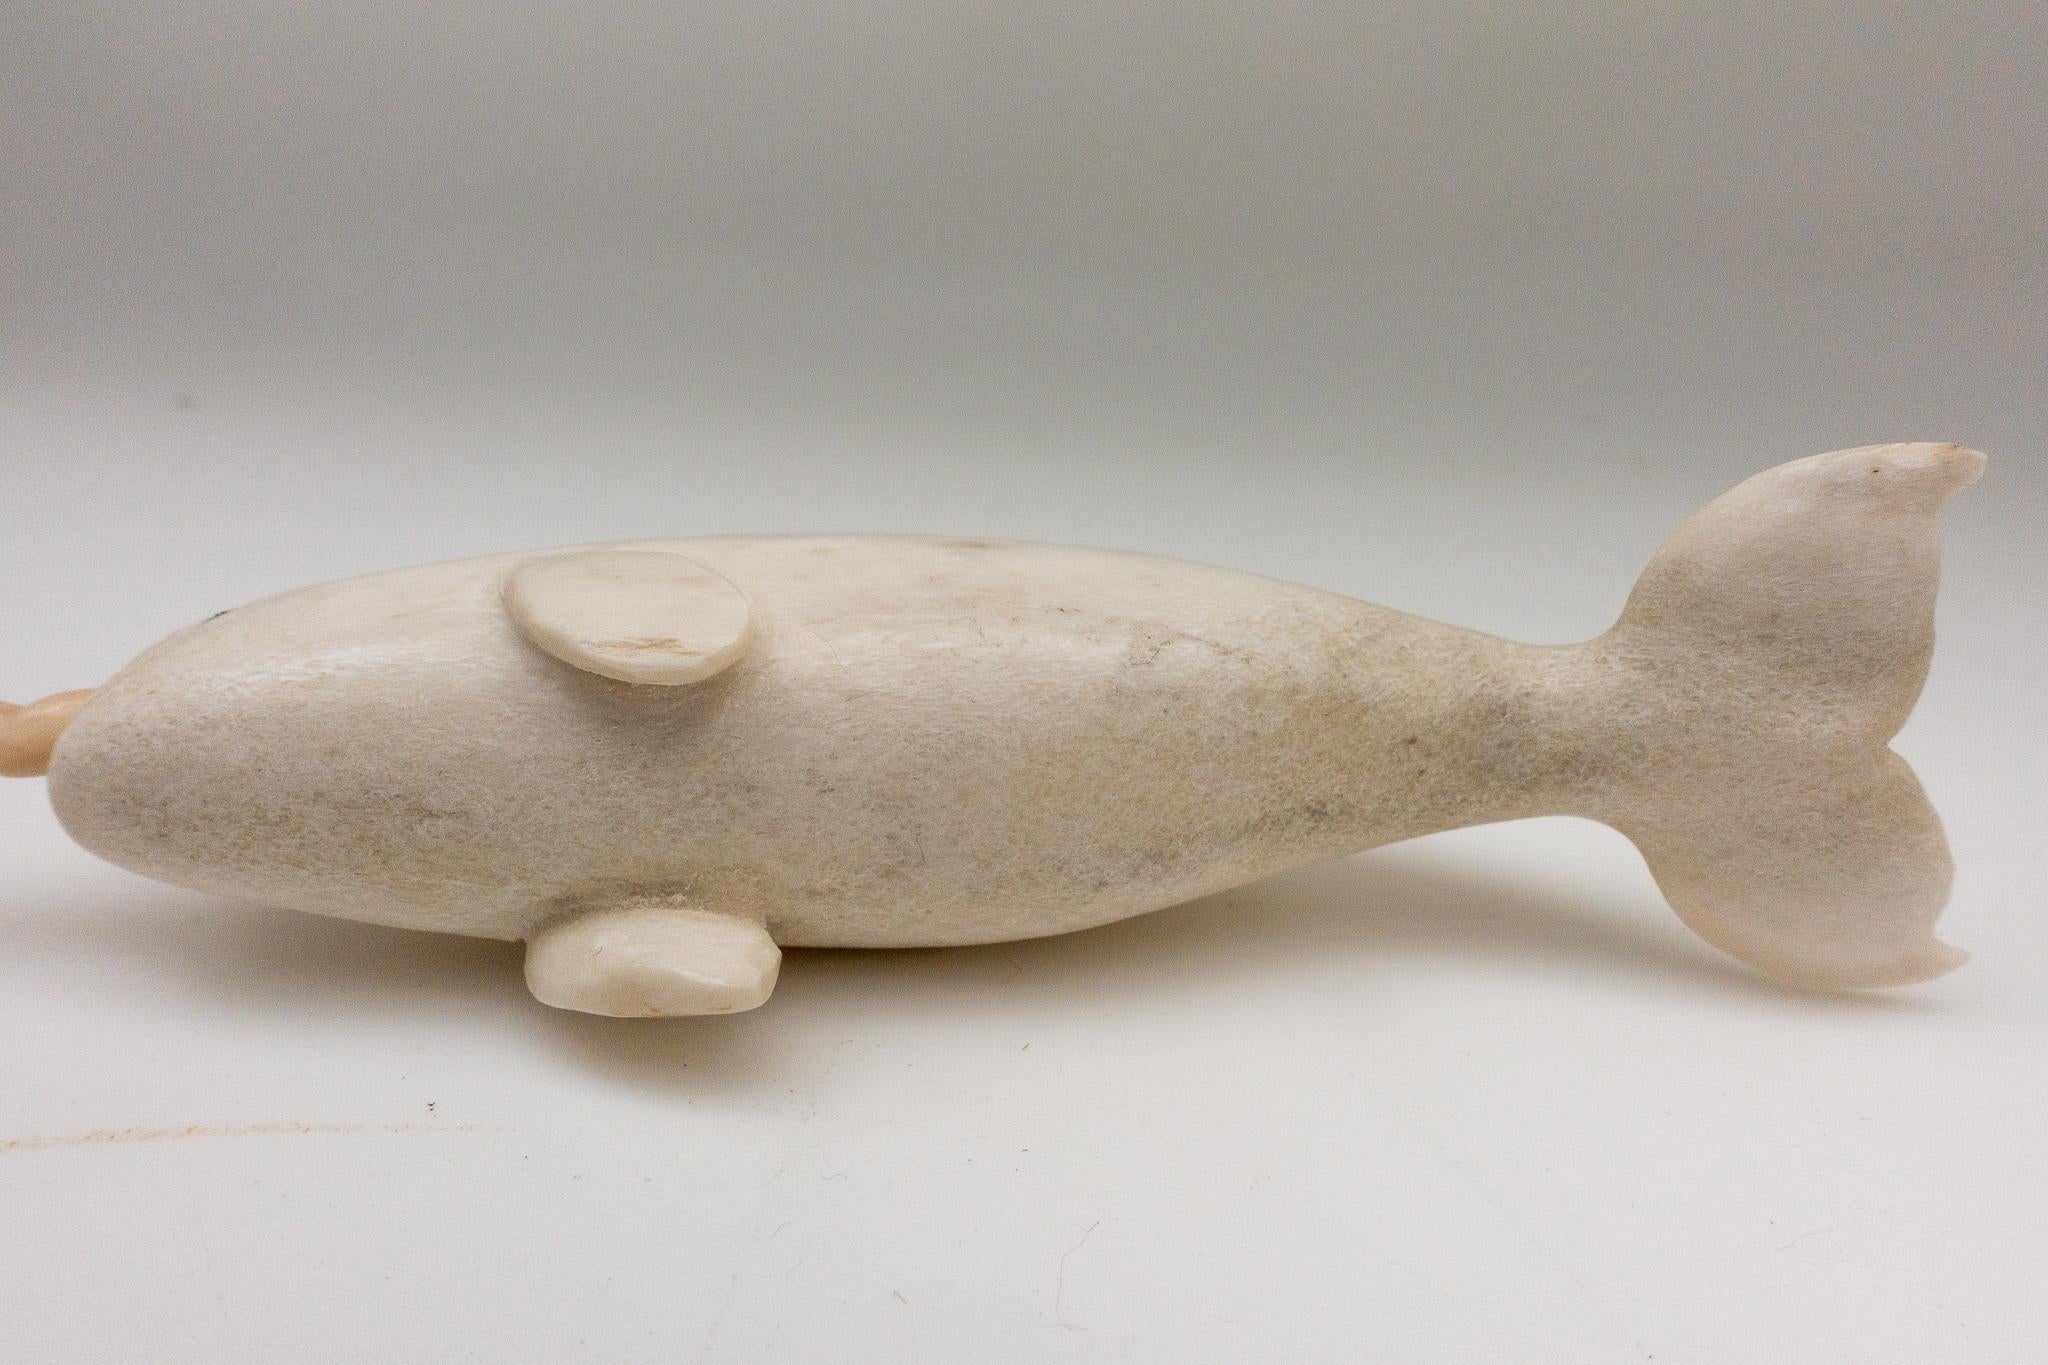 Contemporary North American Moose Antler Carving of Narwhal